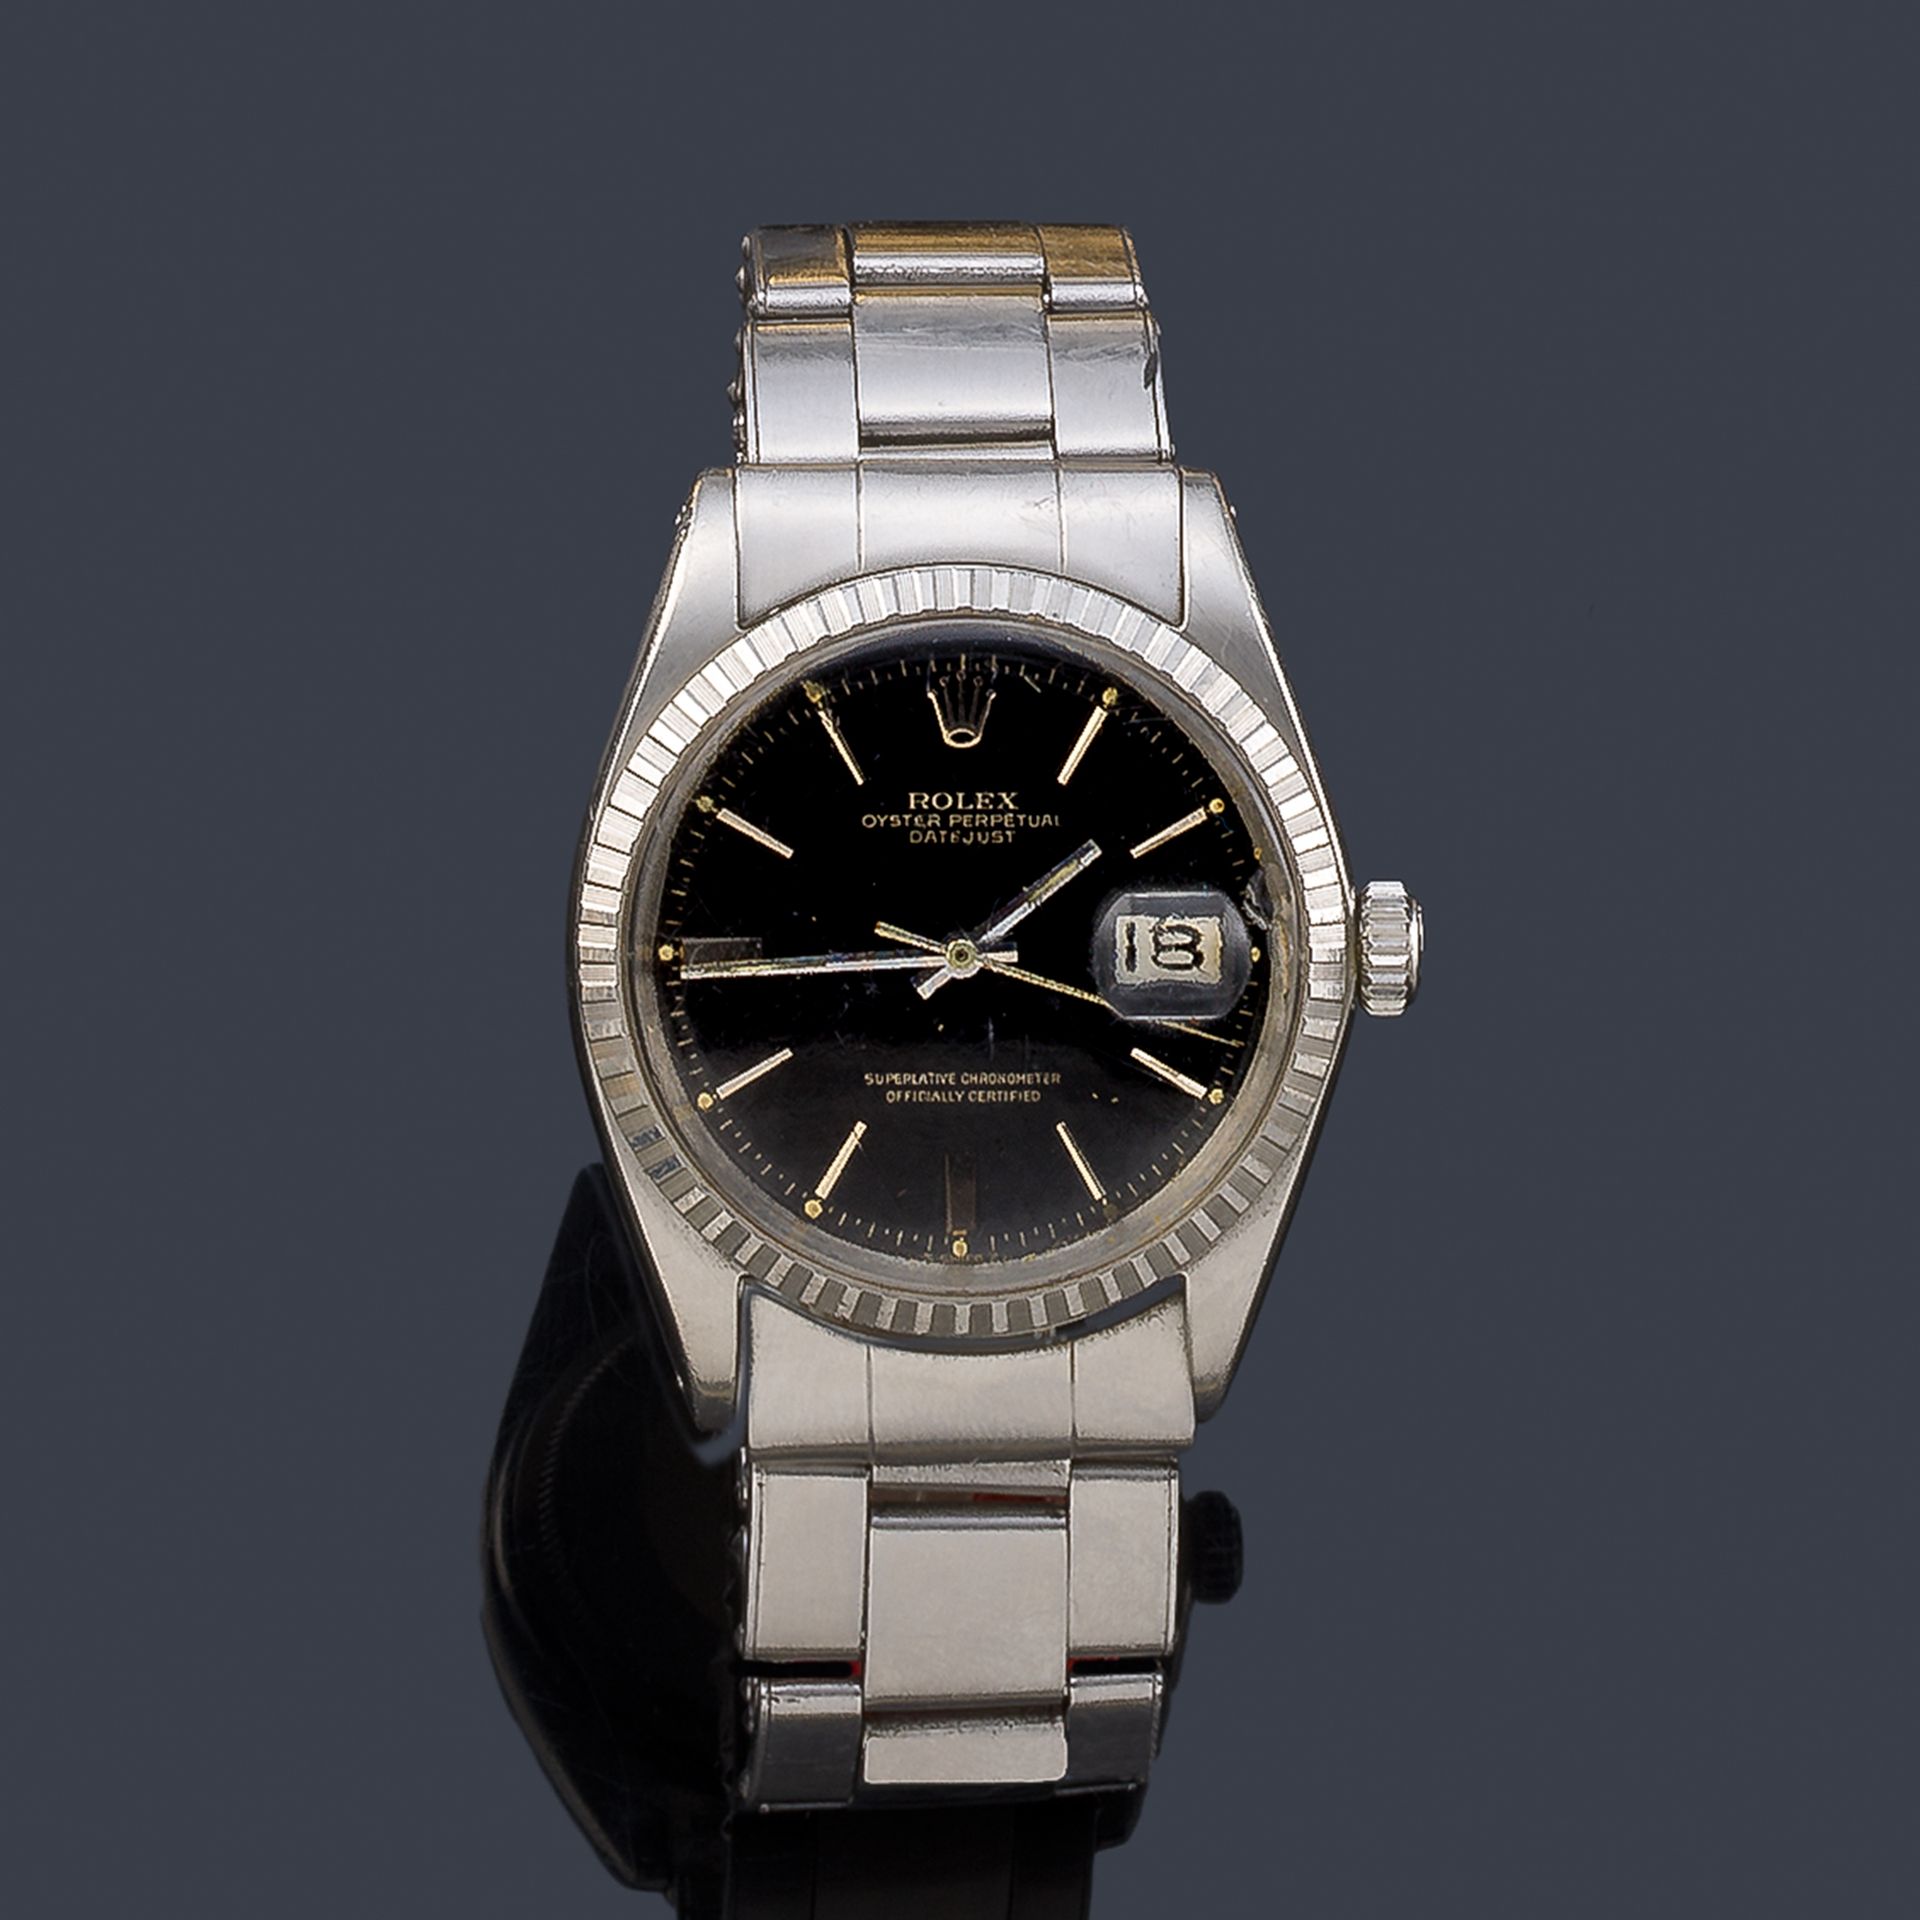 ROLEX Oyster Perpetual Datejust, Superlative Chronometer Officially Certified. R&hellip;